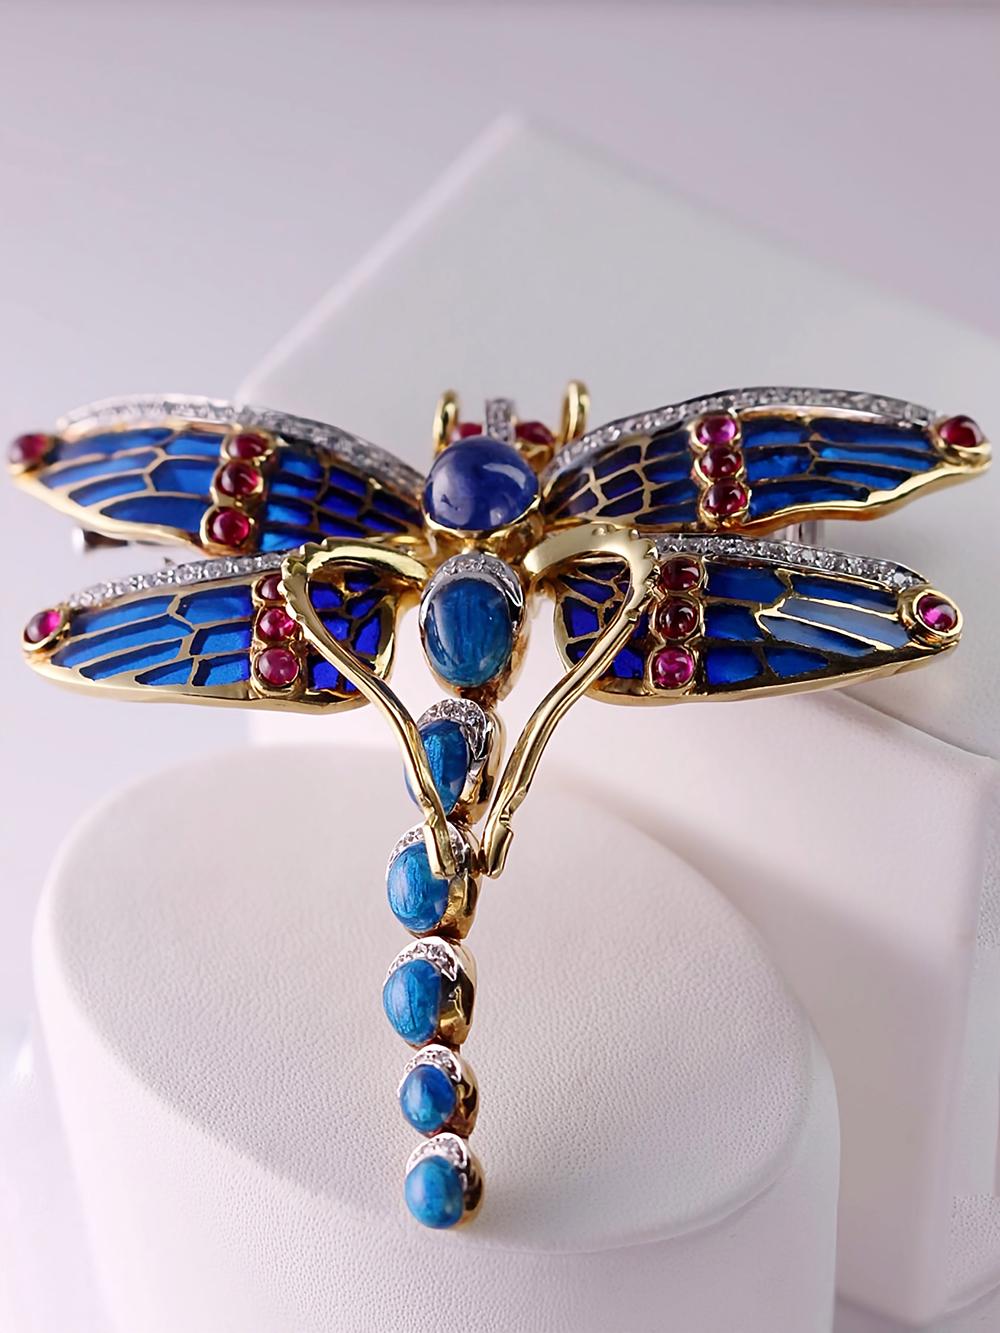 Cabochon Timeless Flight: Handcrafted 18kt Gold Dragonfly Brooch with Precious Gems For Sale